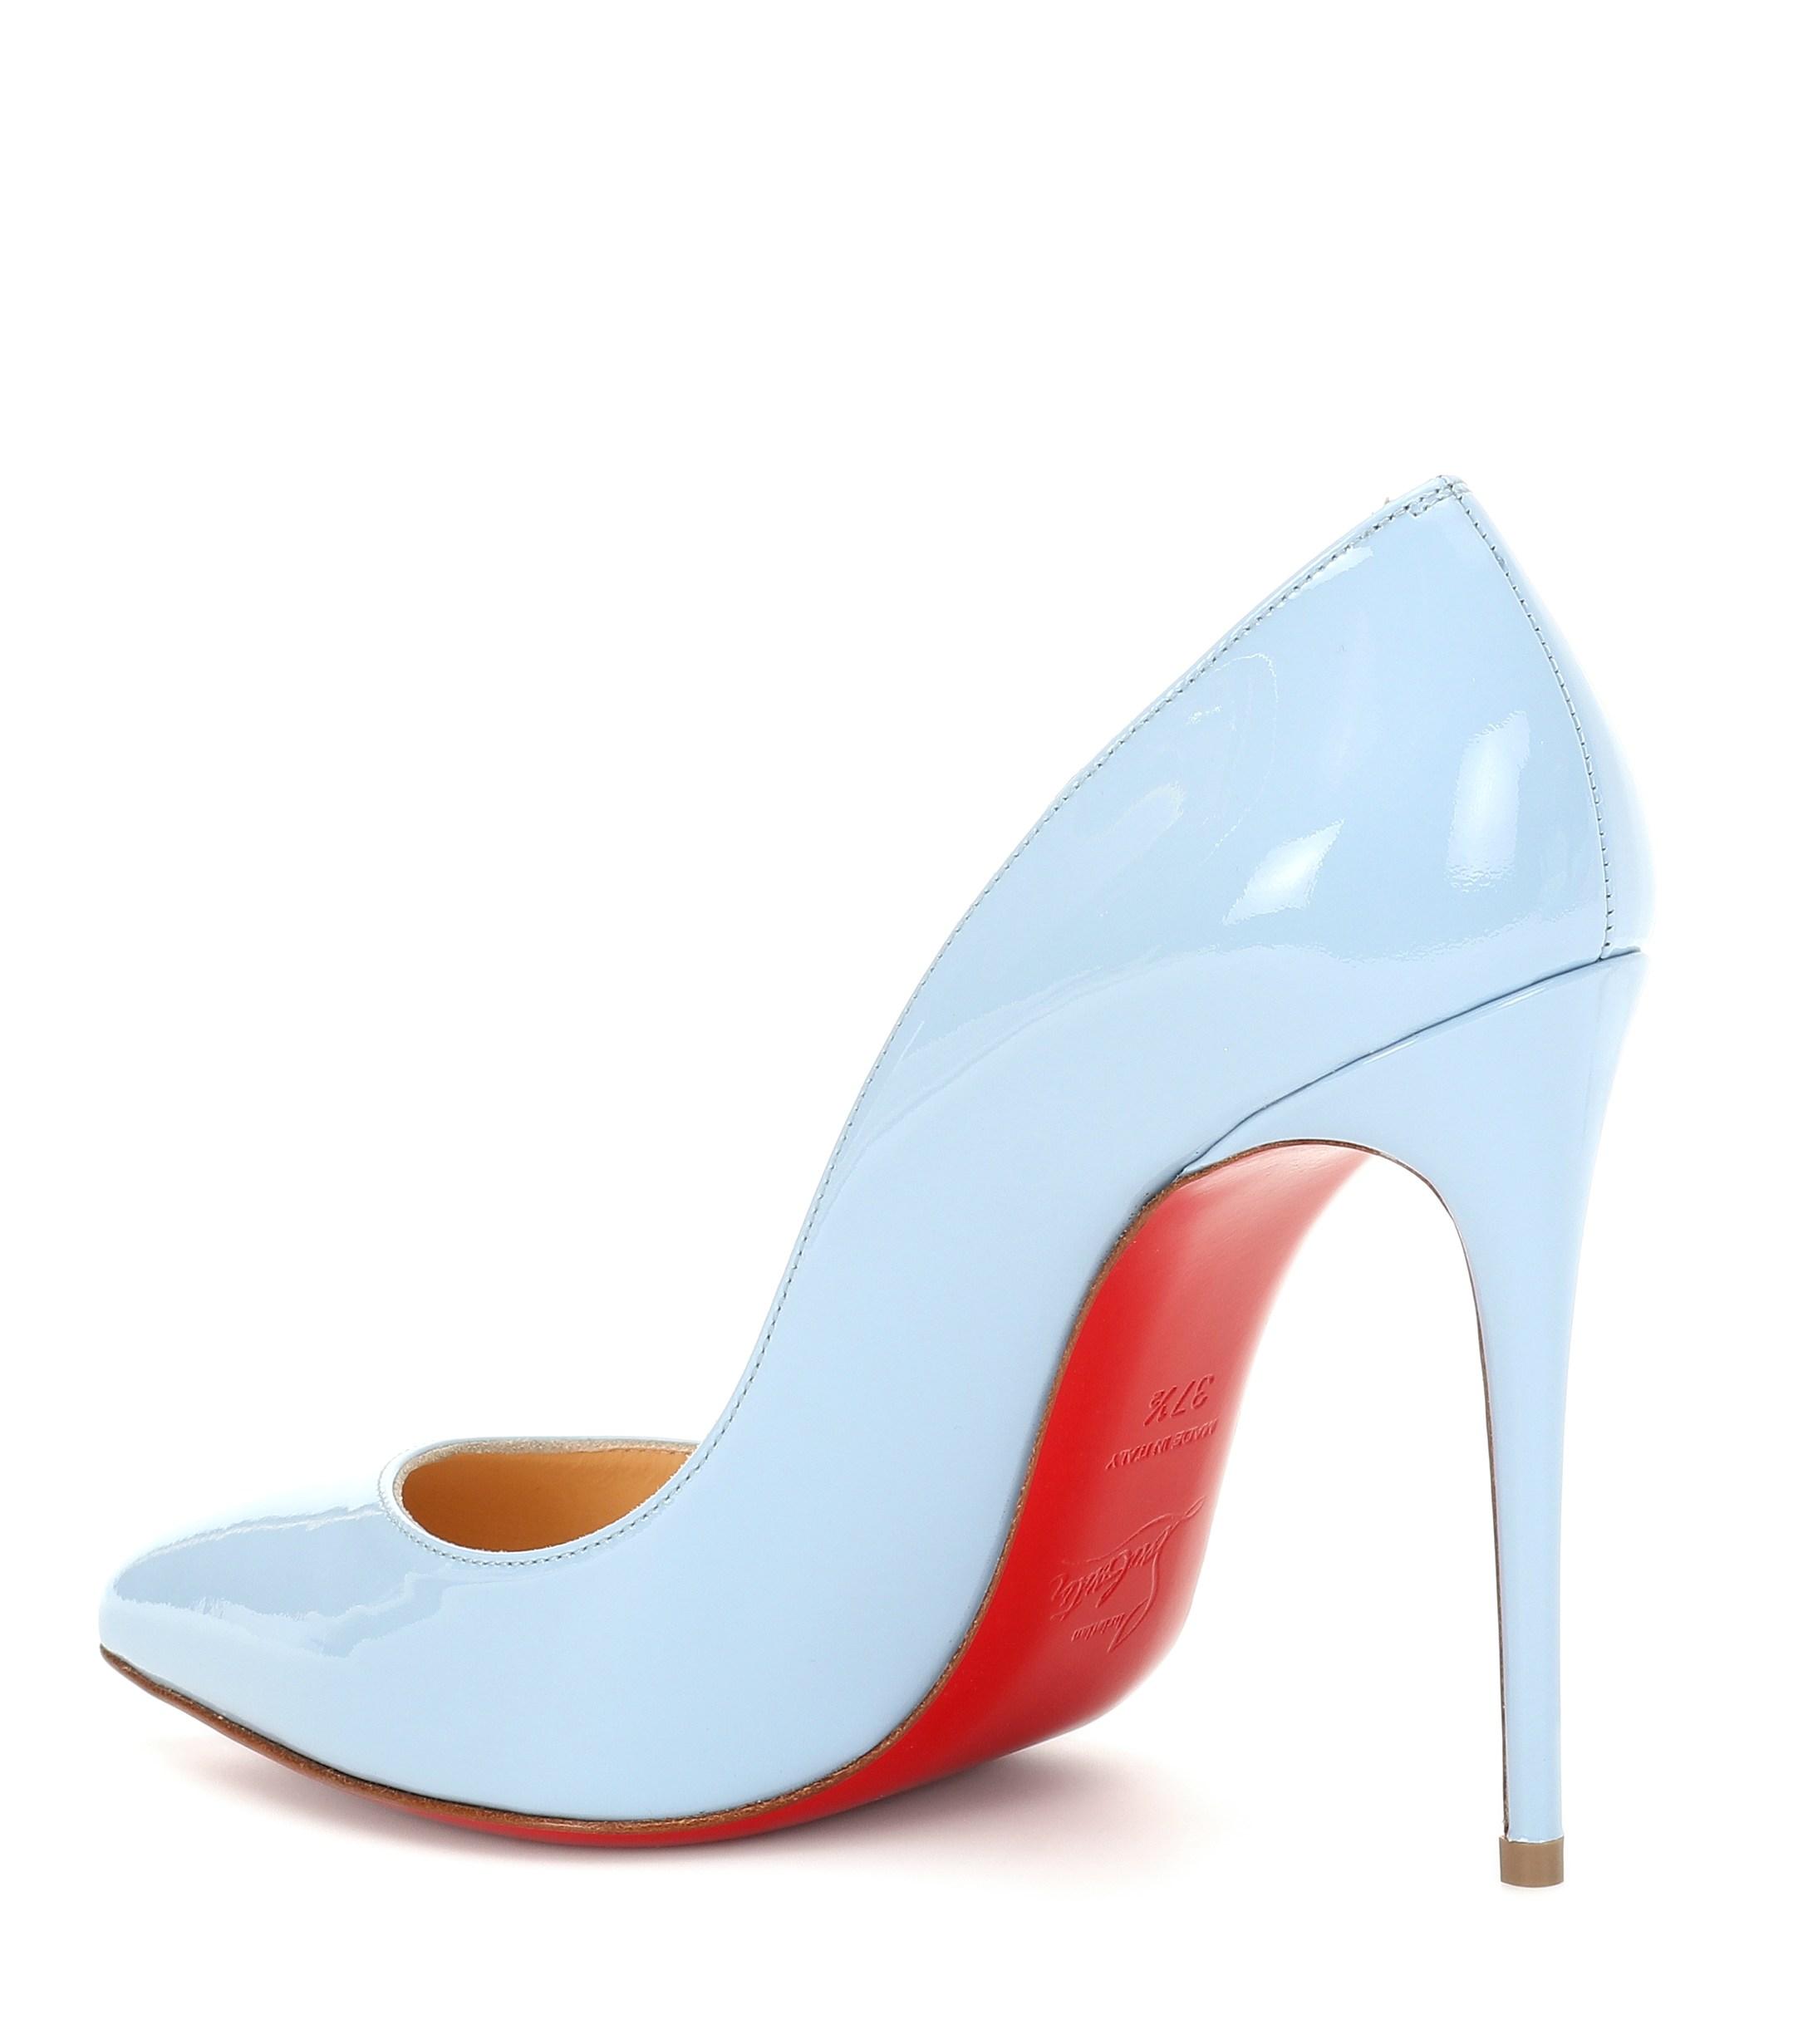 Christian Louboutin Pigalle Follies Patent Leather Pumps in Blue | Lyst